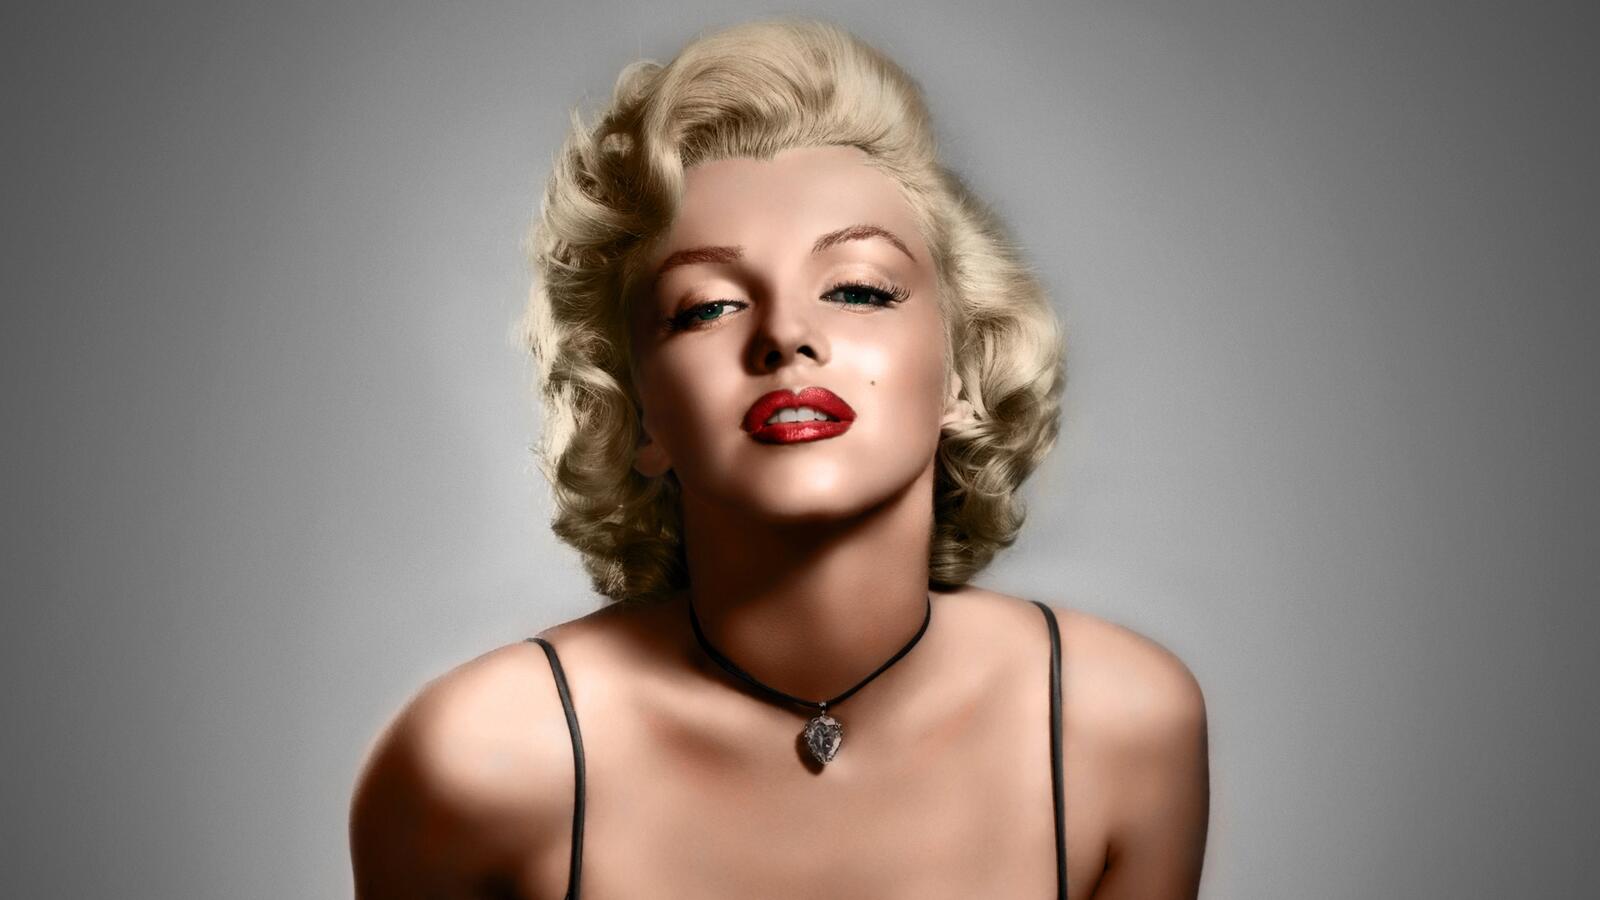 Free photo Marilyn Monroe on a simple background